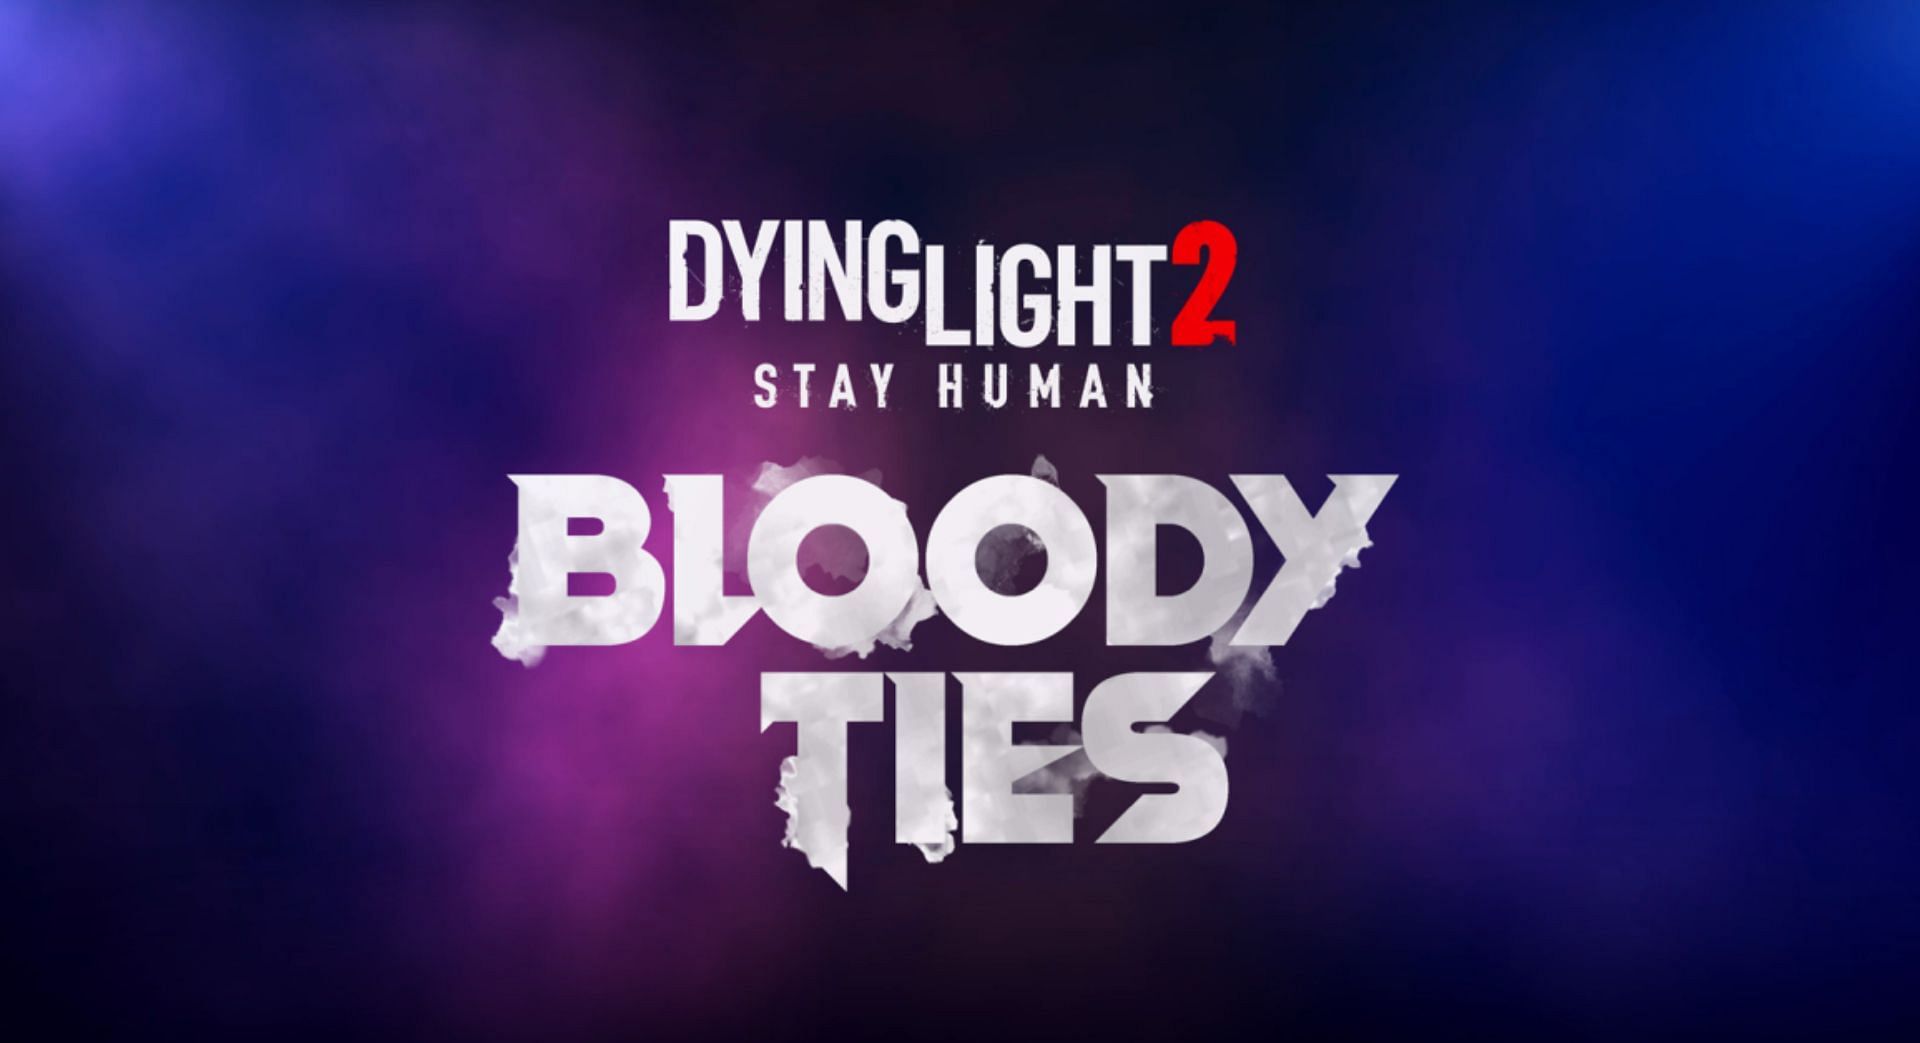 Techland has finally revealed the first expansion for Dying Light 2 Stay Human (Image via Techland)